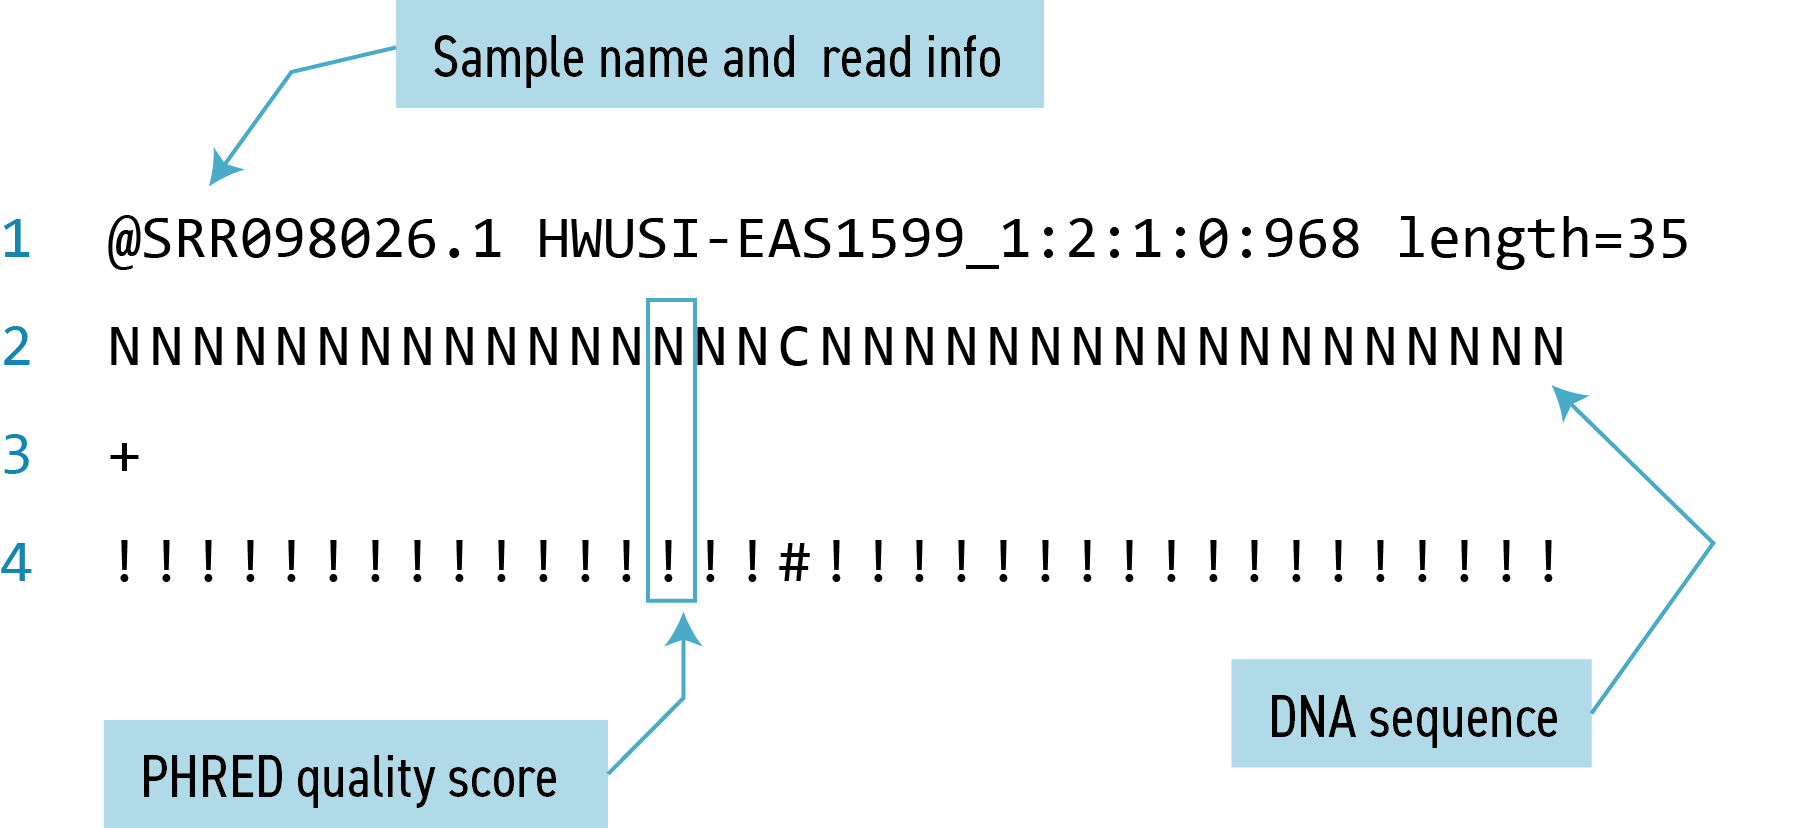 A diagram showing that each read in a FASTQ file comprises 4 lines of information.